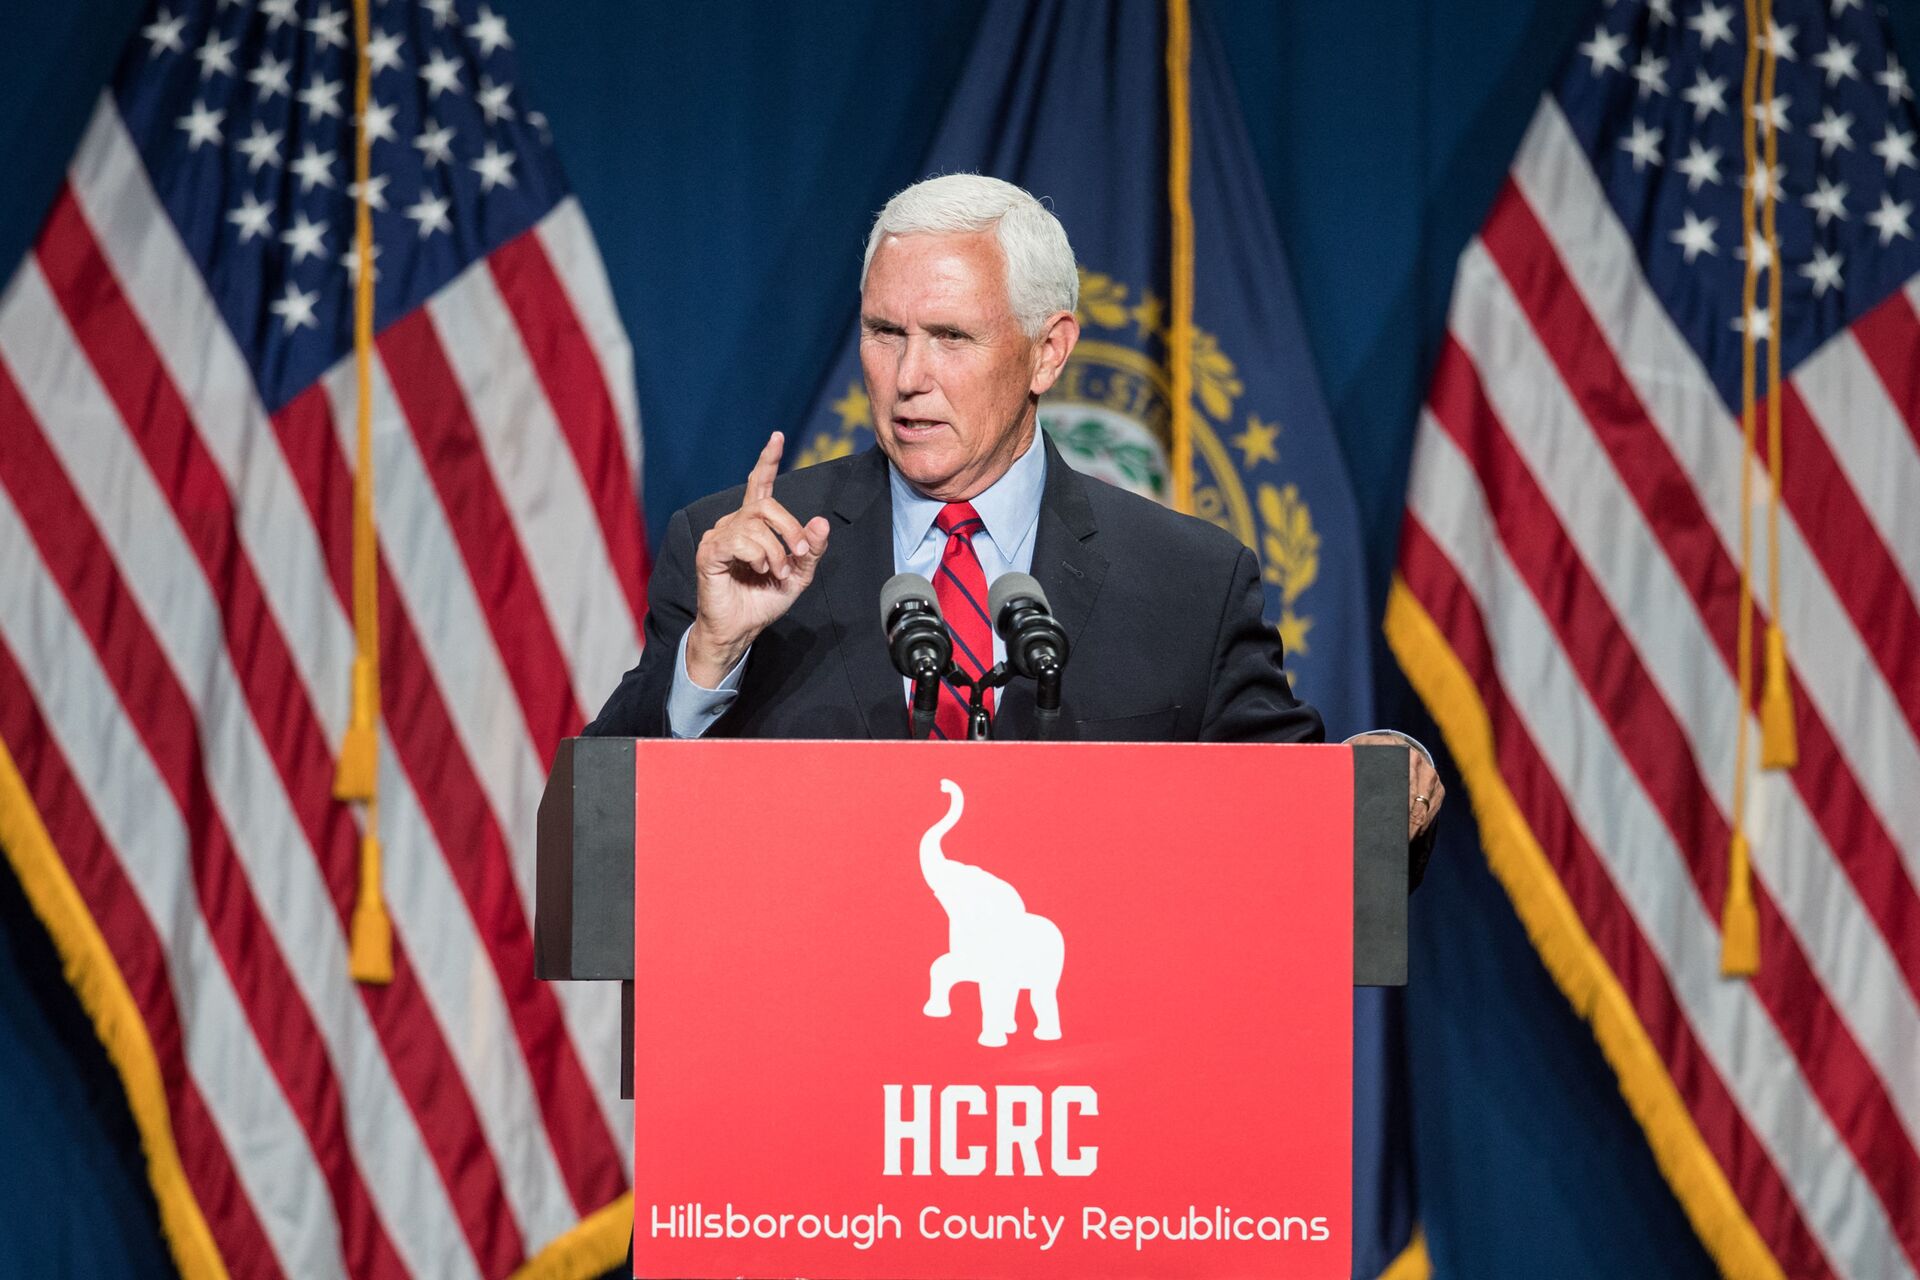 Former Vice President Mike Pence addresses the GOP Lincoln-Reagan Dinner on June 3, 2021 in Manchester, New Hampshire. Pence's visit to New Hampshire would be the first time back since he was Vice President.   - Sputnik International, 1920, 07.09.2021